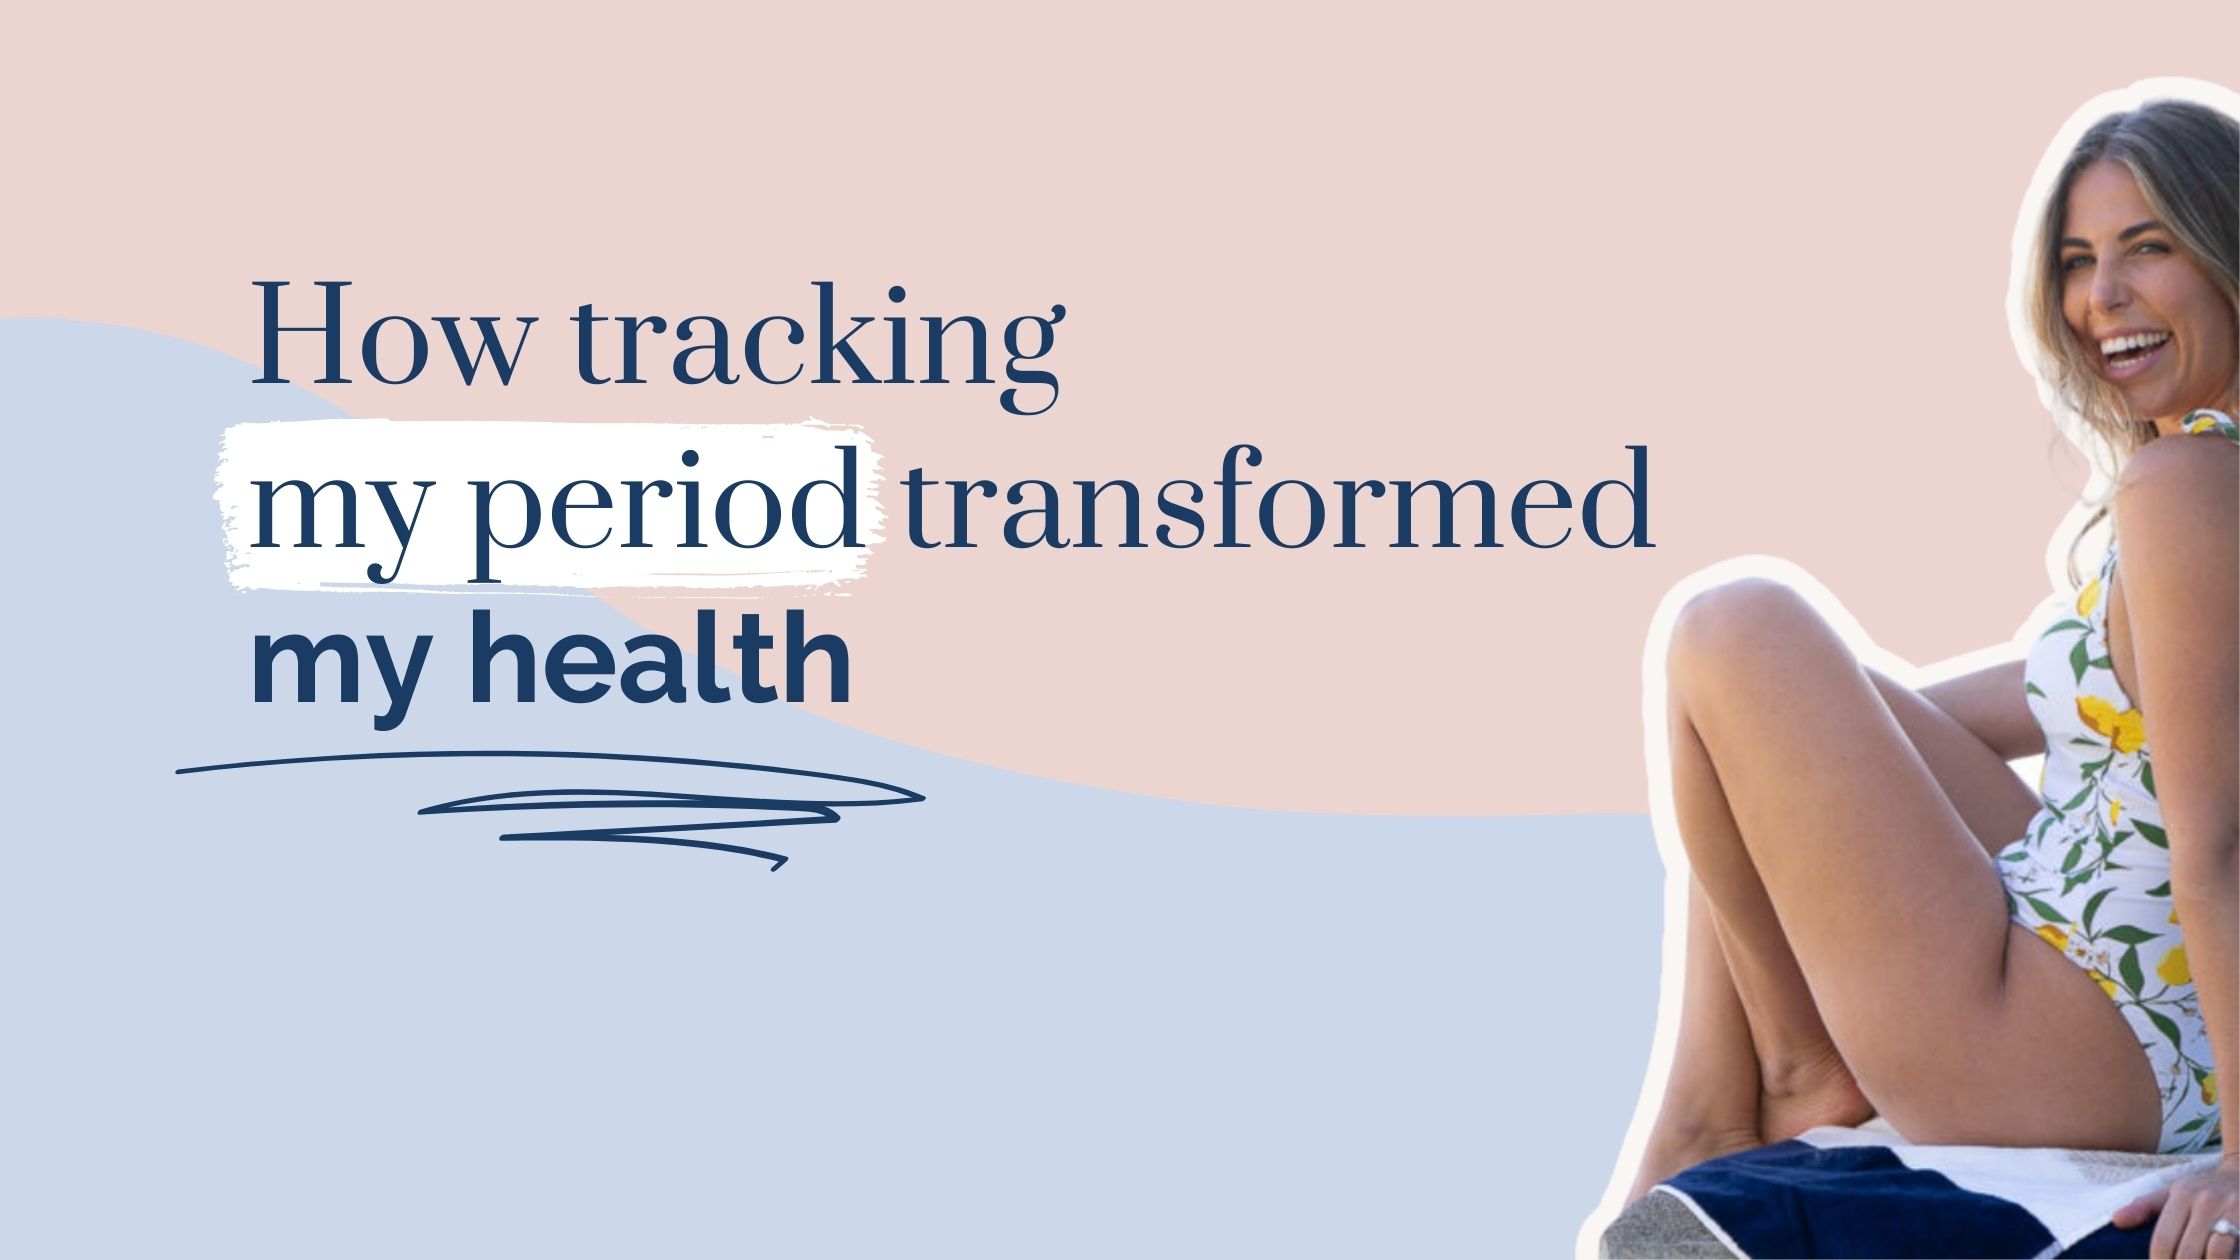 How tracking my period transformed my health. Image: Lyndi Cohen